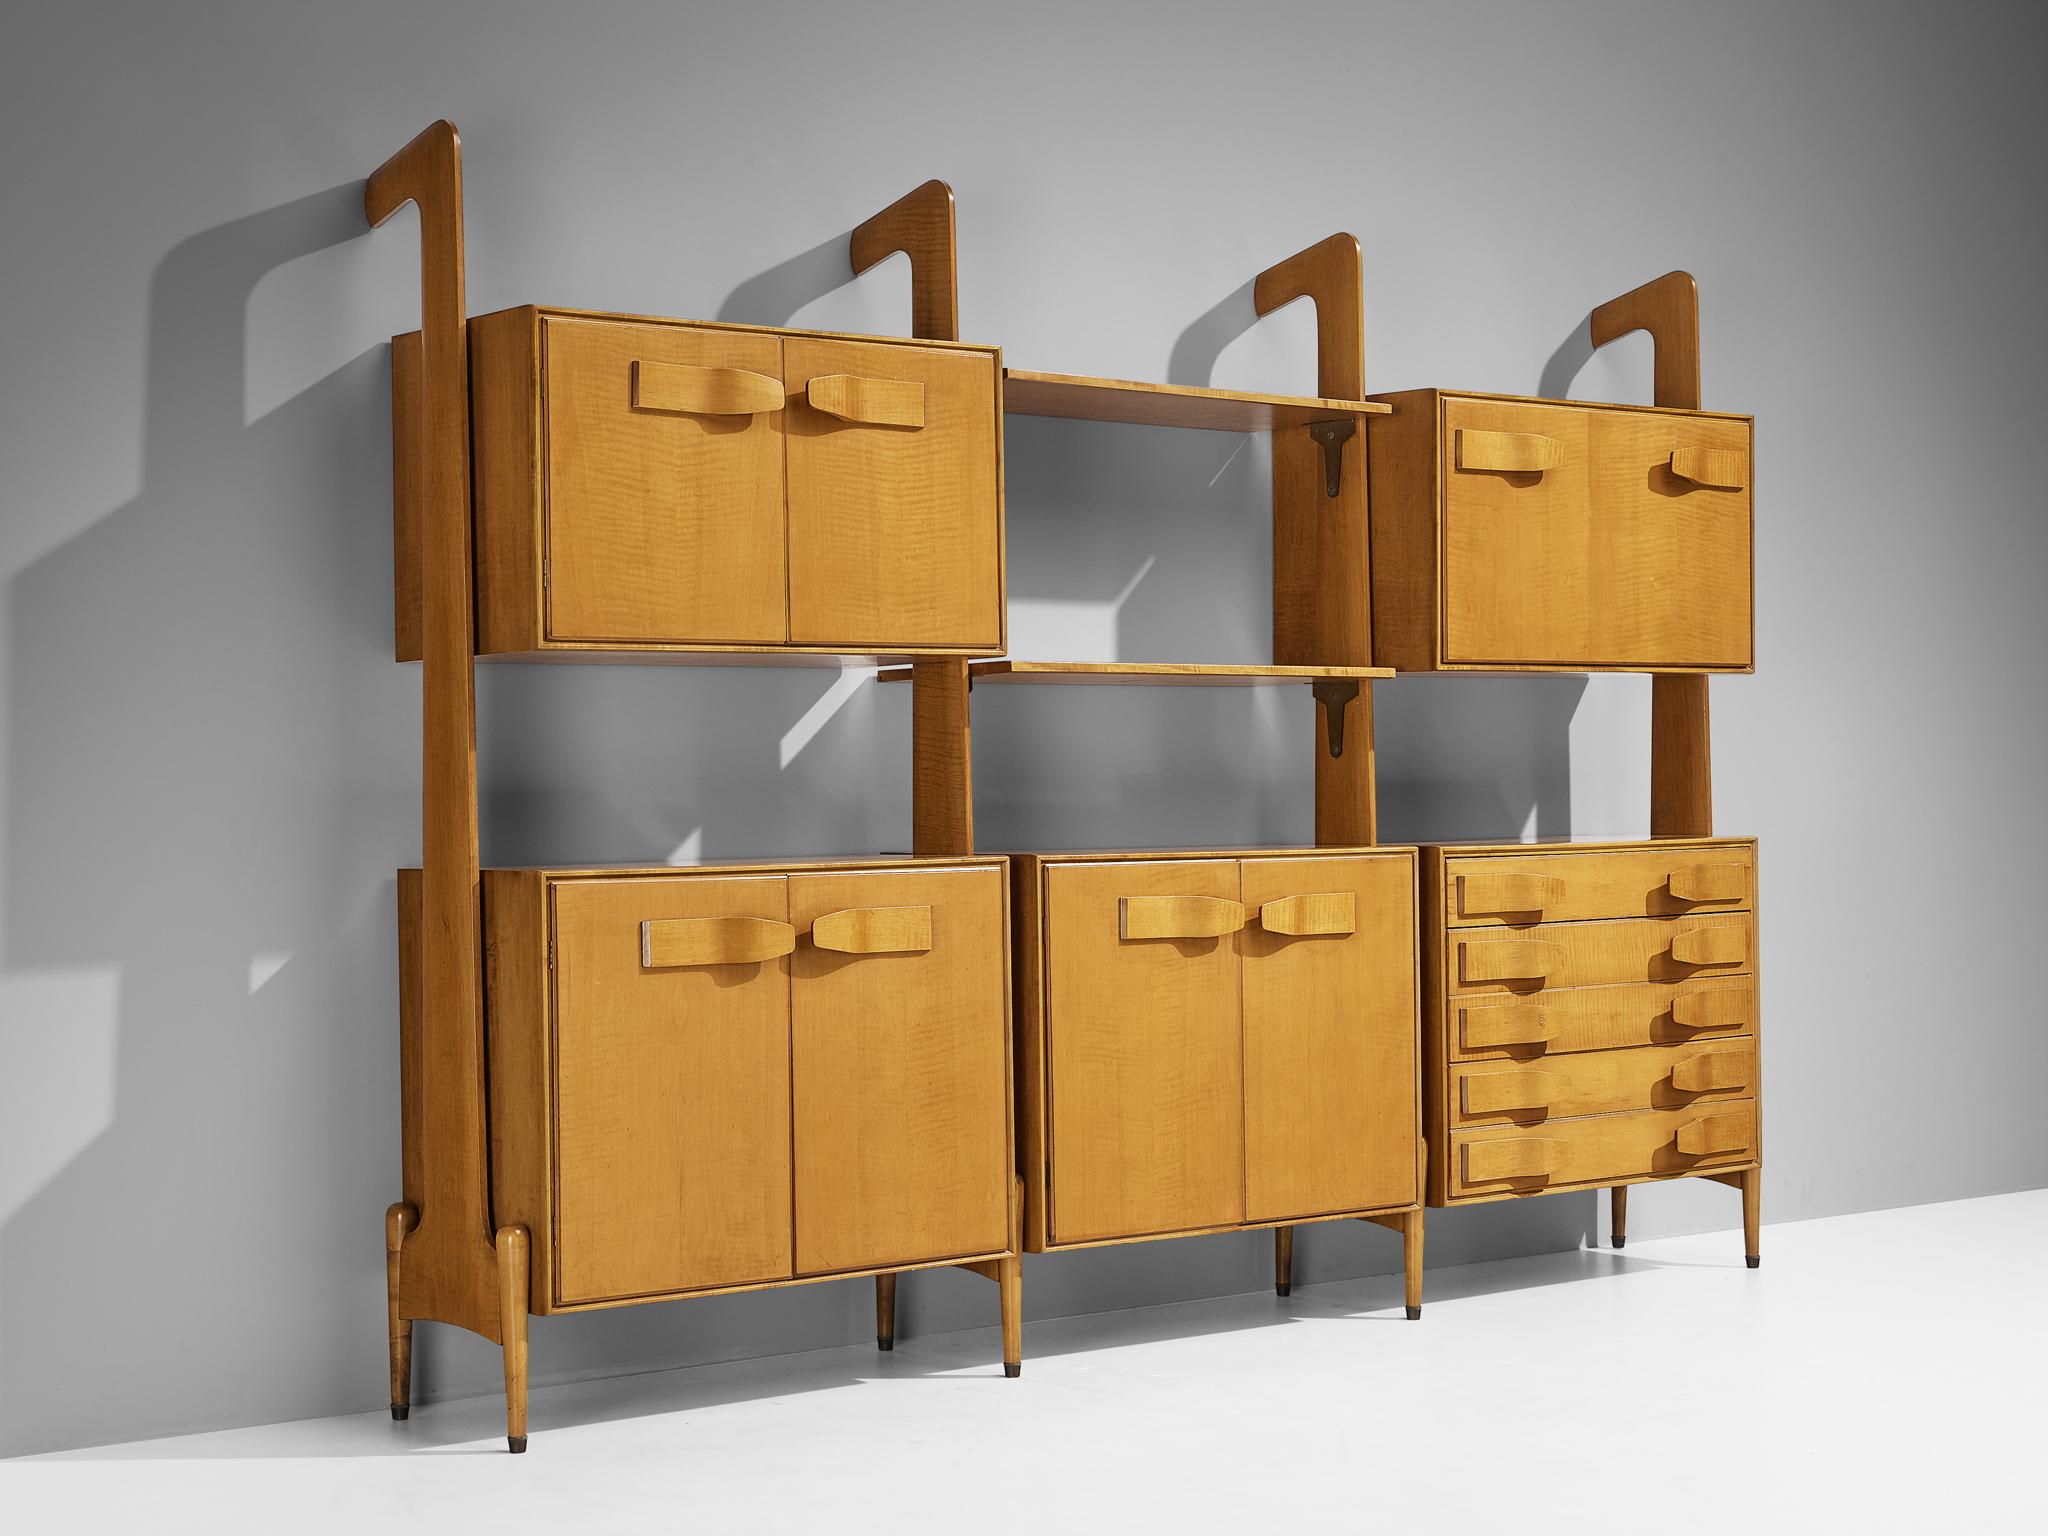 Wall unit, cherry, brass, Italy, 1960s

Hailing from a skilled artisan of Italy, this exceptional library unit excels in form, Material use, composition, and craftsmanship. The bookcase reflects the design principles of the midcentury era that